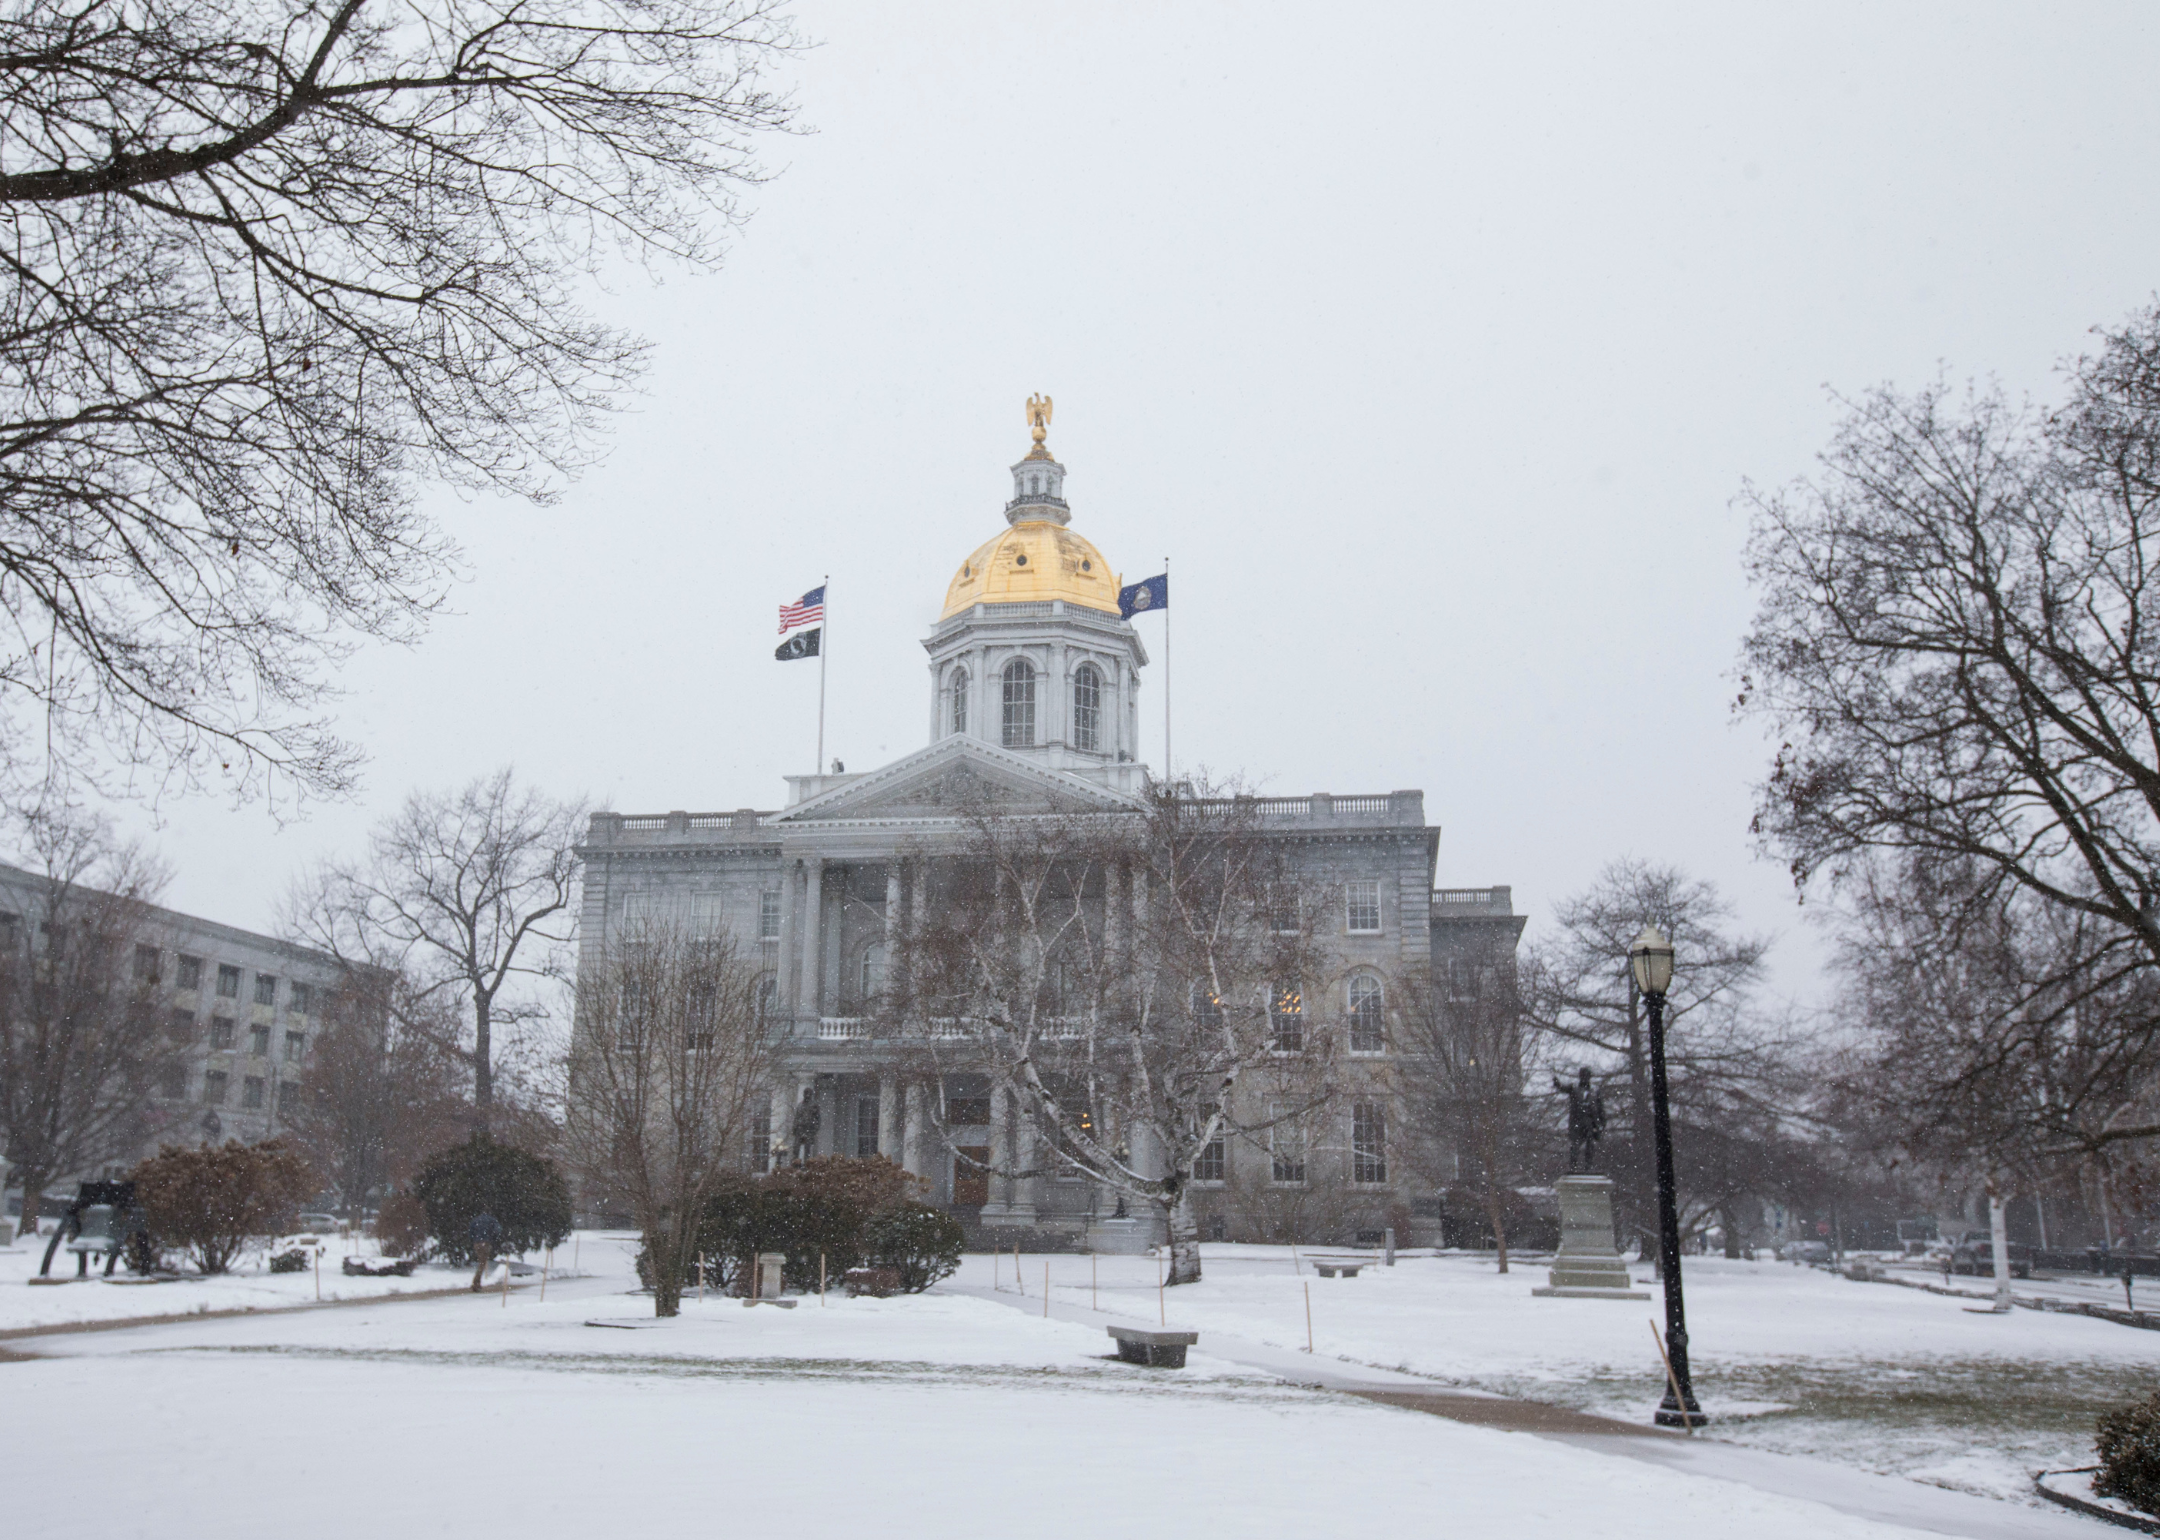 A snowy view of the capitol building in Concord.